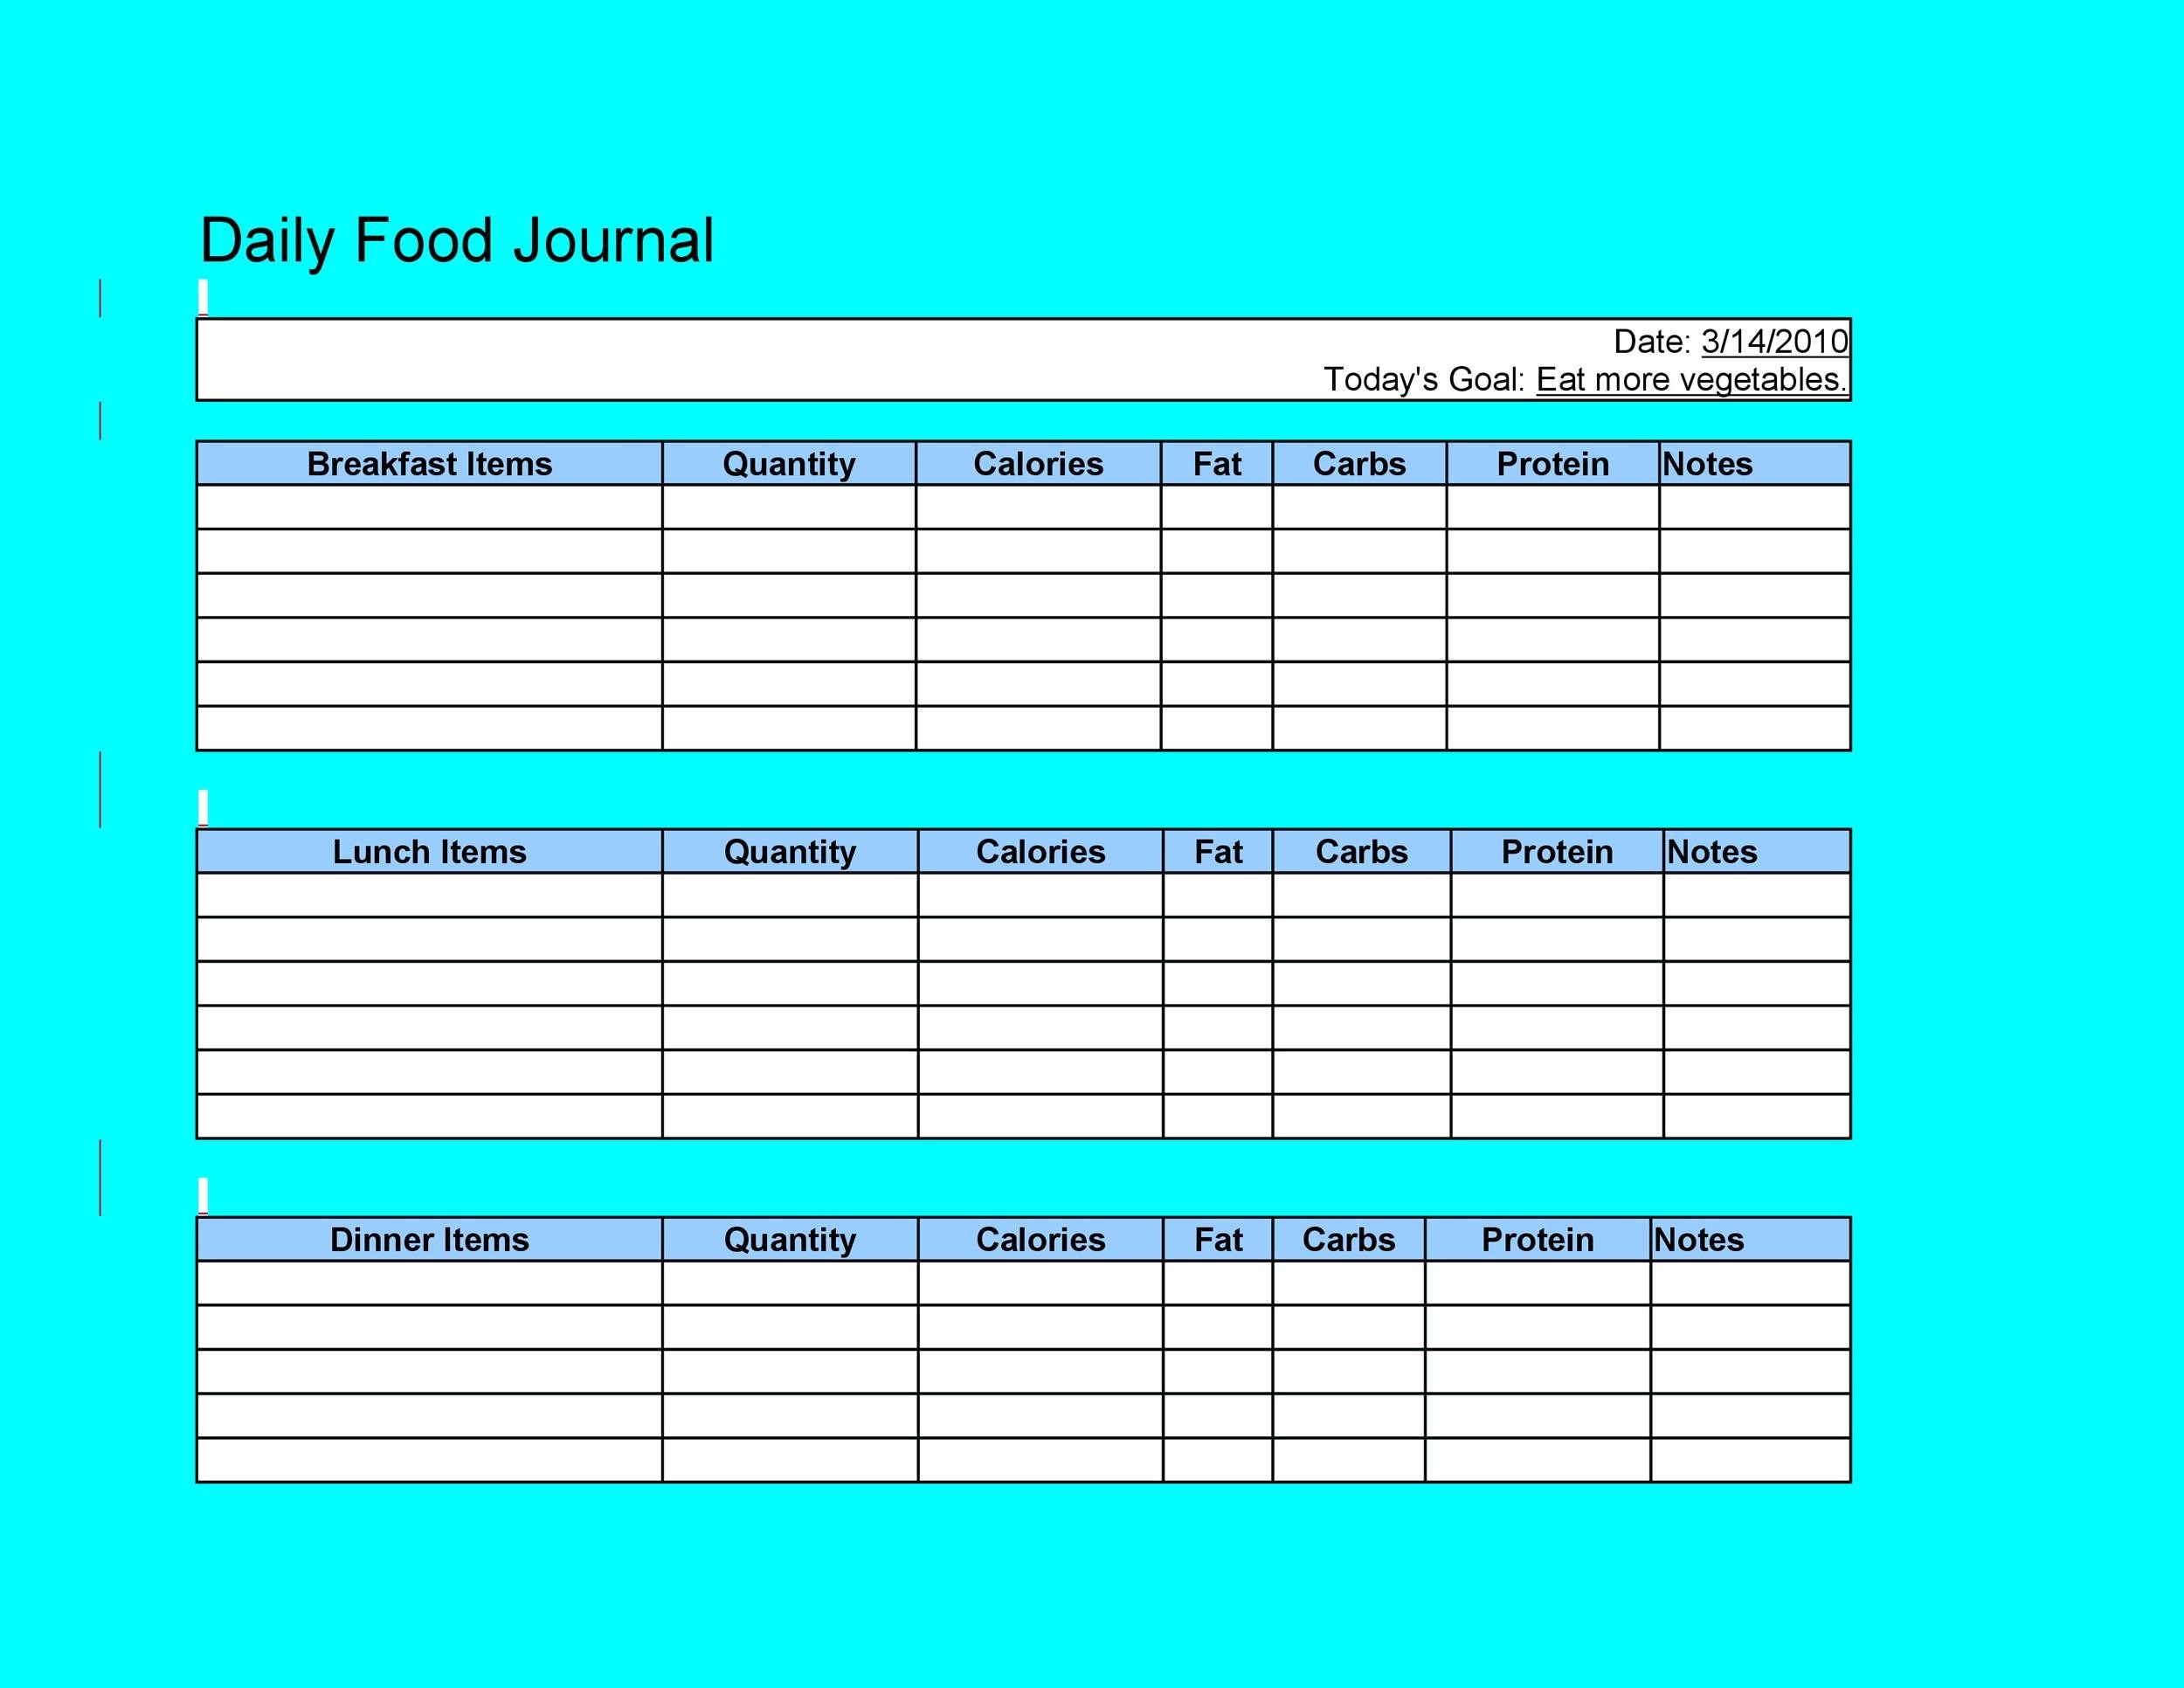 food and feed research journal